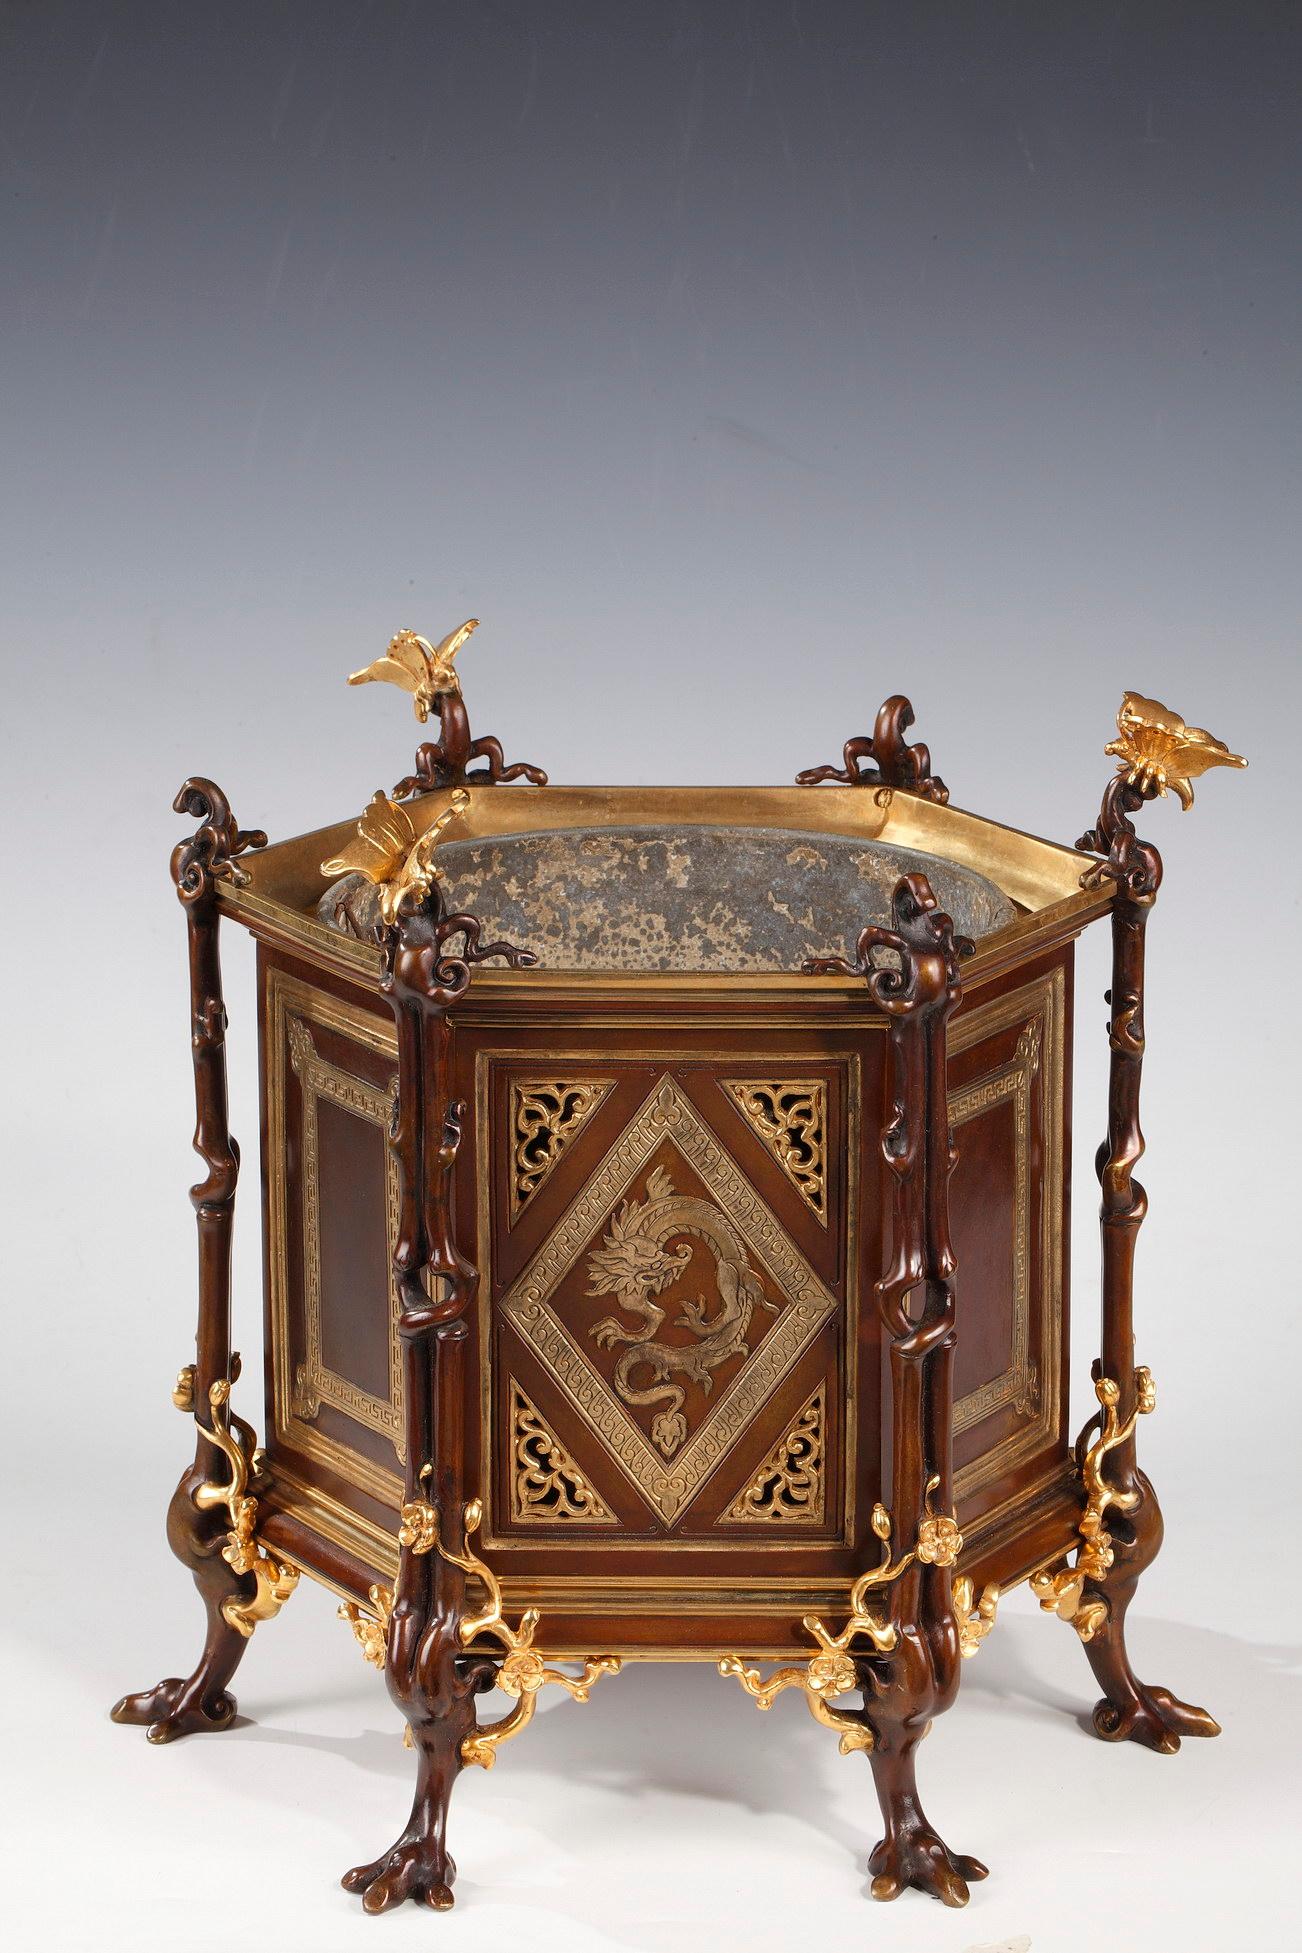 Signed H.P for Henri Pannier.

Lovely hexagonal shaped planter in patinated bronze with gold highlights. Adorned on three sides with a dragon framed by a rhombus frieze on an openwork background.
It is framed by six uprights showing branches